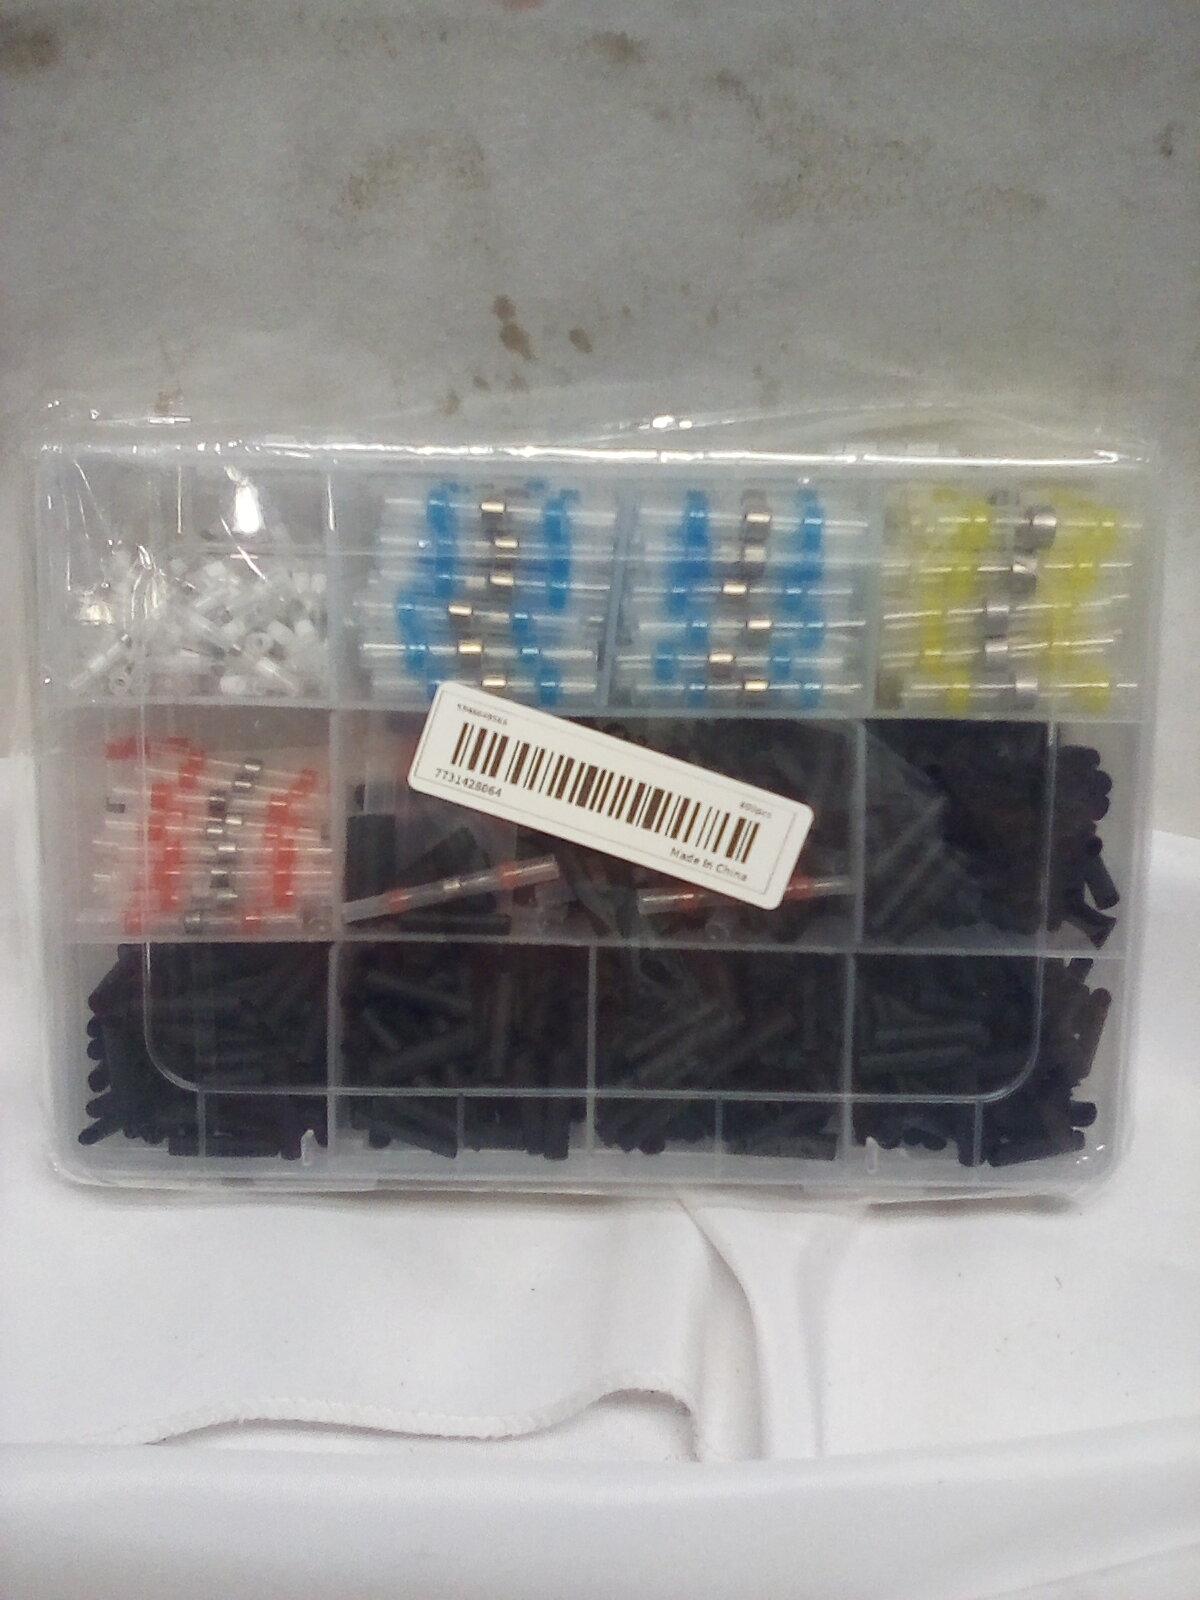 800 Piece Electrical Connector Repair Kit.